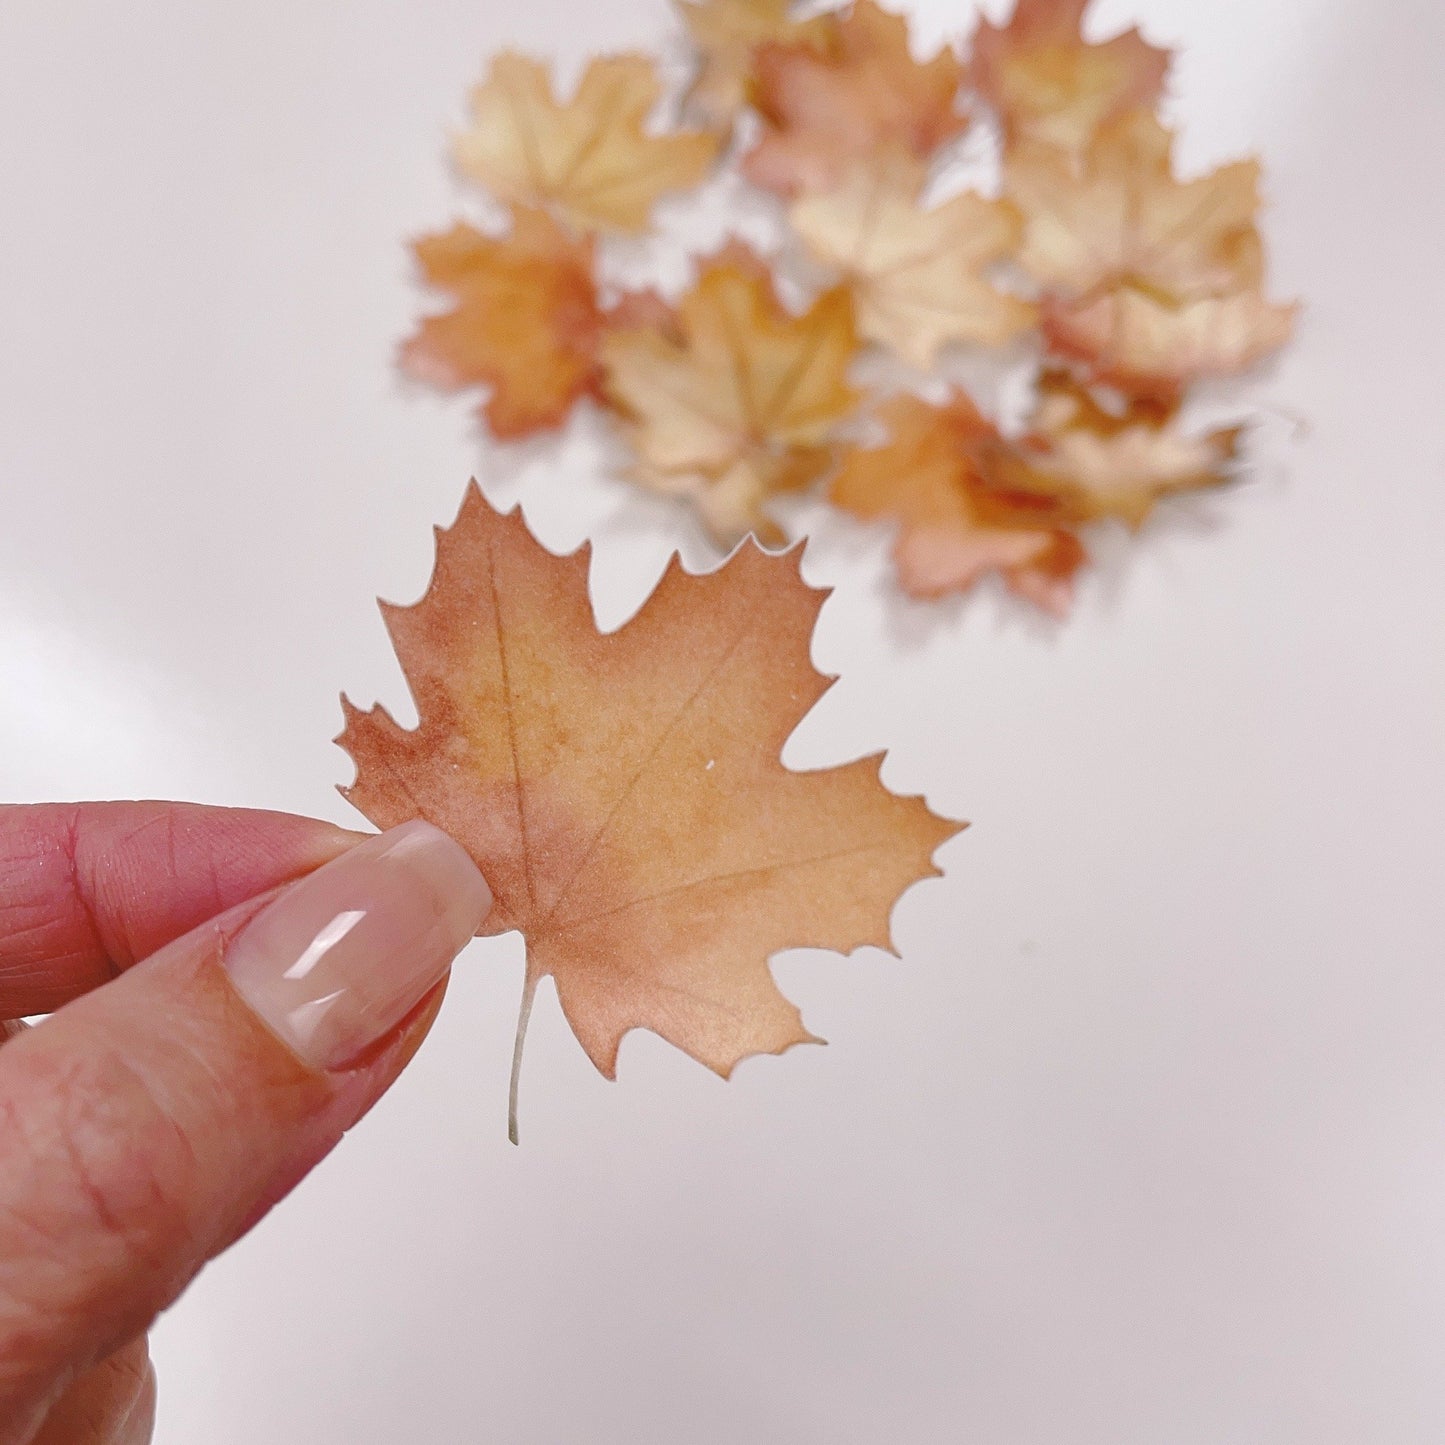 More Wafer Paper Autumn Maple Leaves Pack of 15